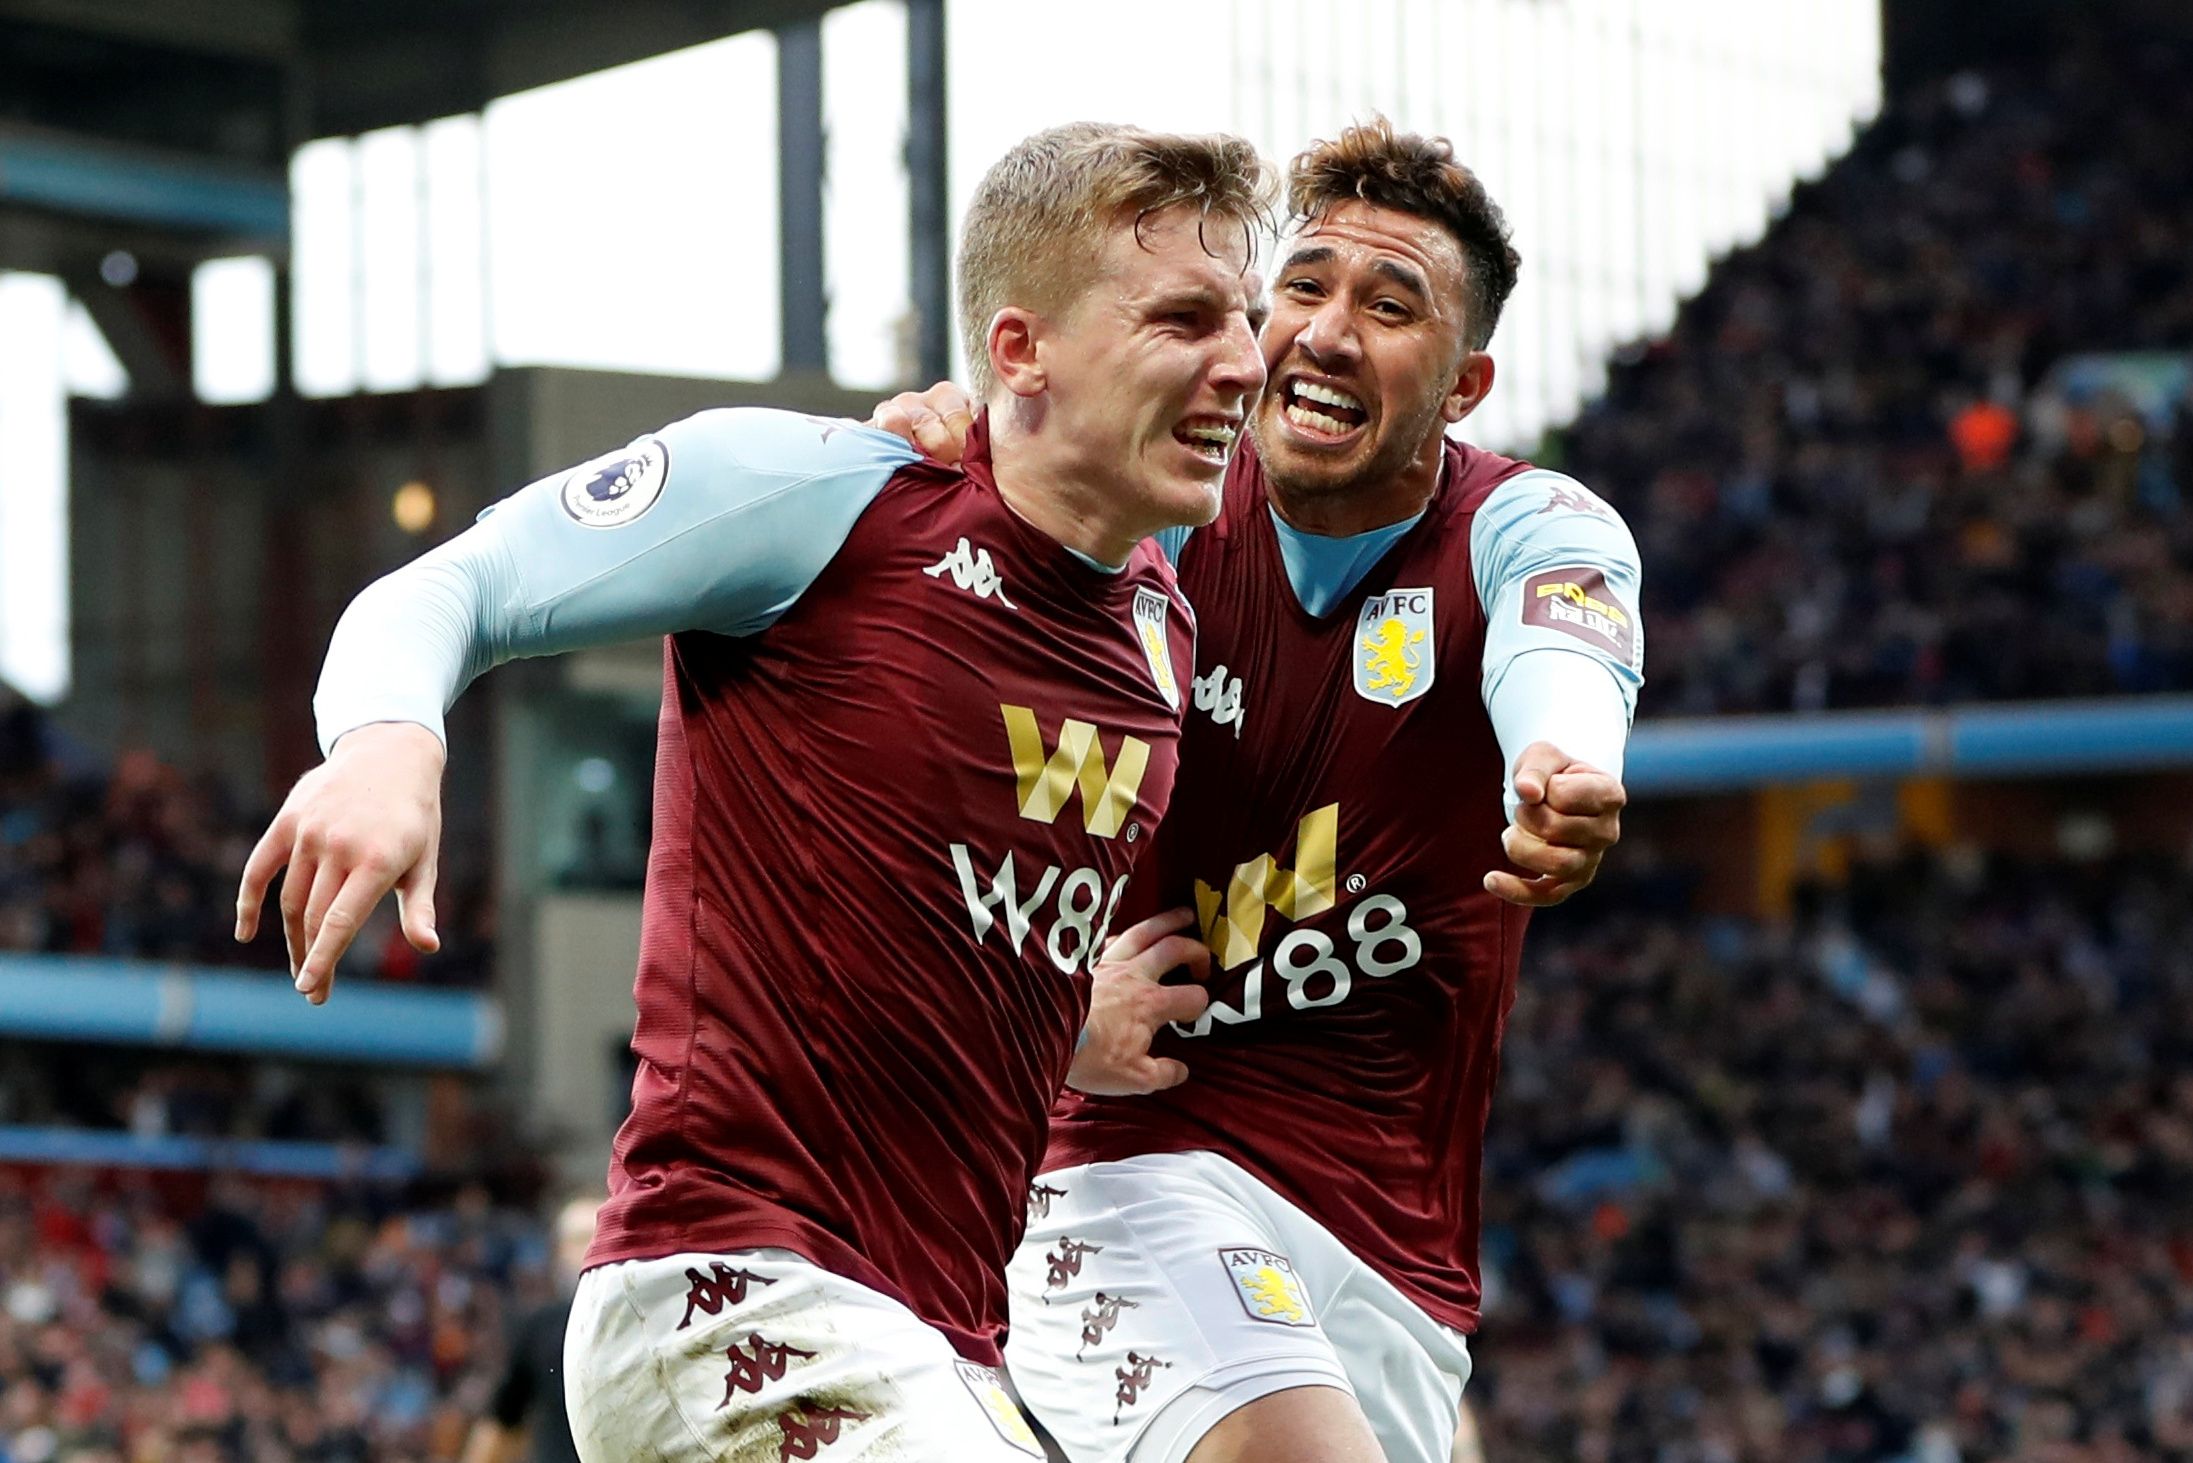 Soccer Football - Premier League - Aston Villa v Brighton &amp; Hove Albion - Villa Park, Birmingham, Britain - October 19, 2019  Aston Villa's Matt Targett celebrates scoring their second goal            Action Images via Reuters/Paul Childs  EDITORIAL USE ONLY. No use with unauthorized audio, video, data, fixture lists, club/league logos or "live" services. Online in-match use limited to 75 images, no video emulation. No use in betting, games or single club/league/player publications.  Please 